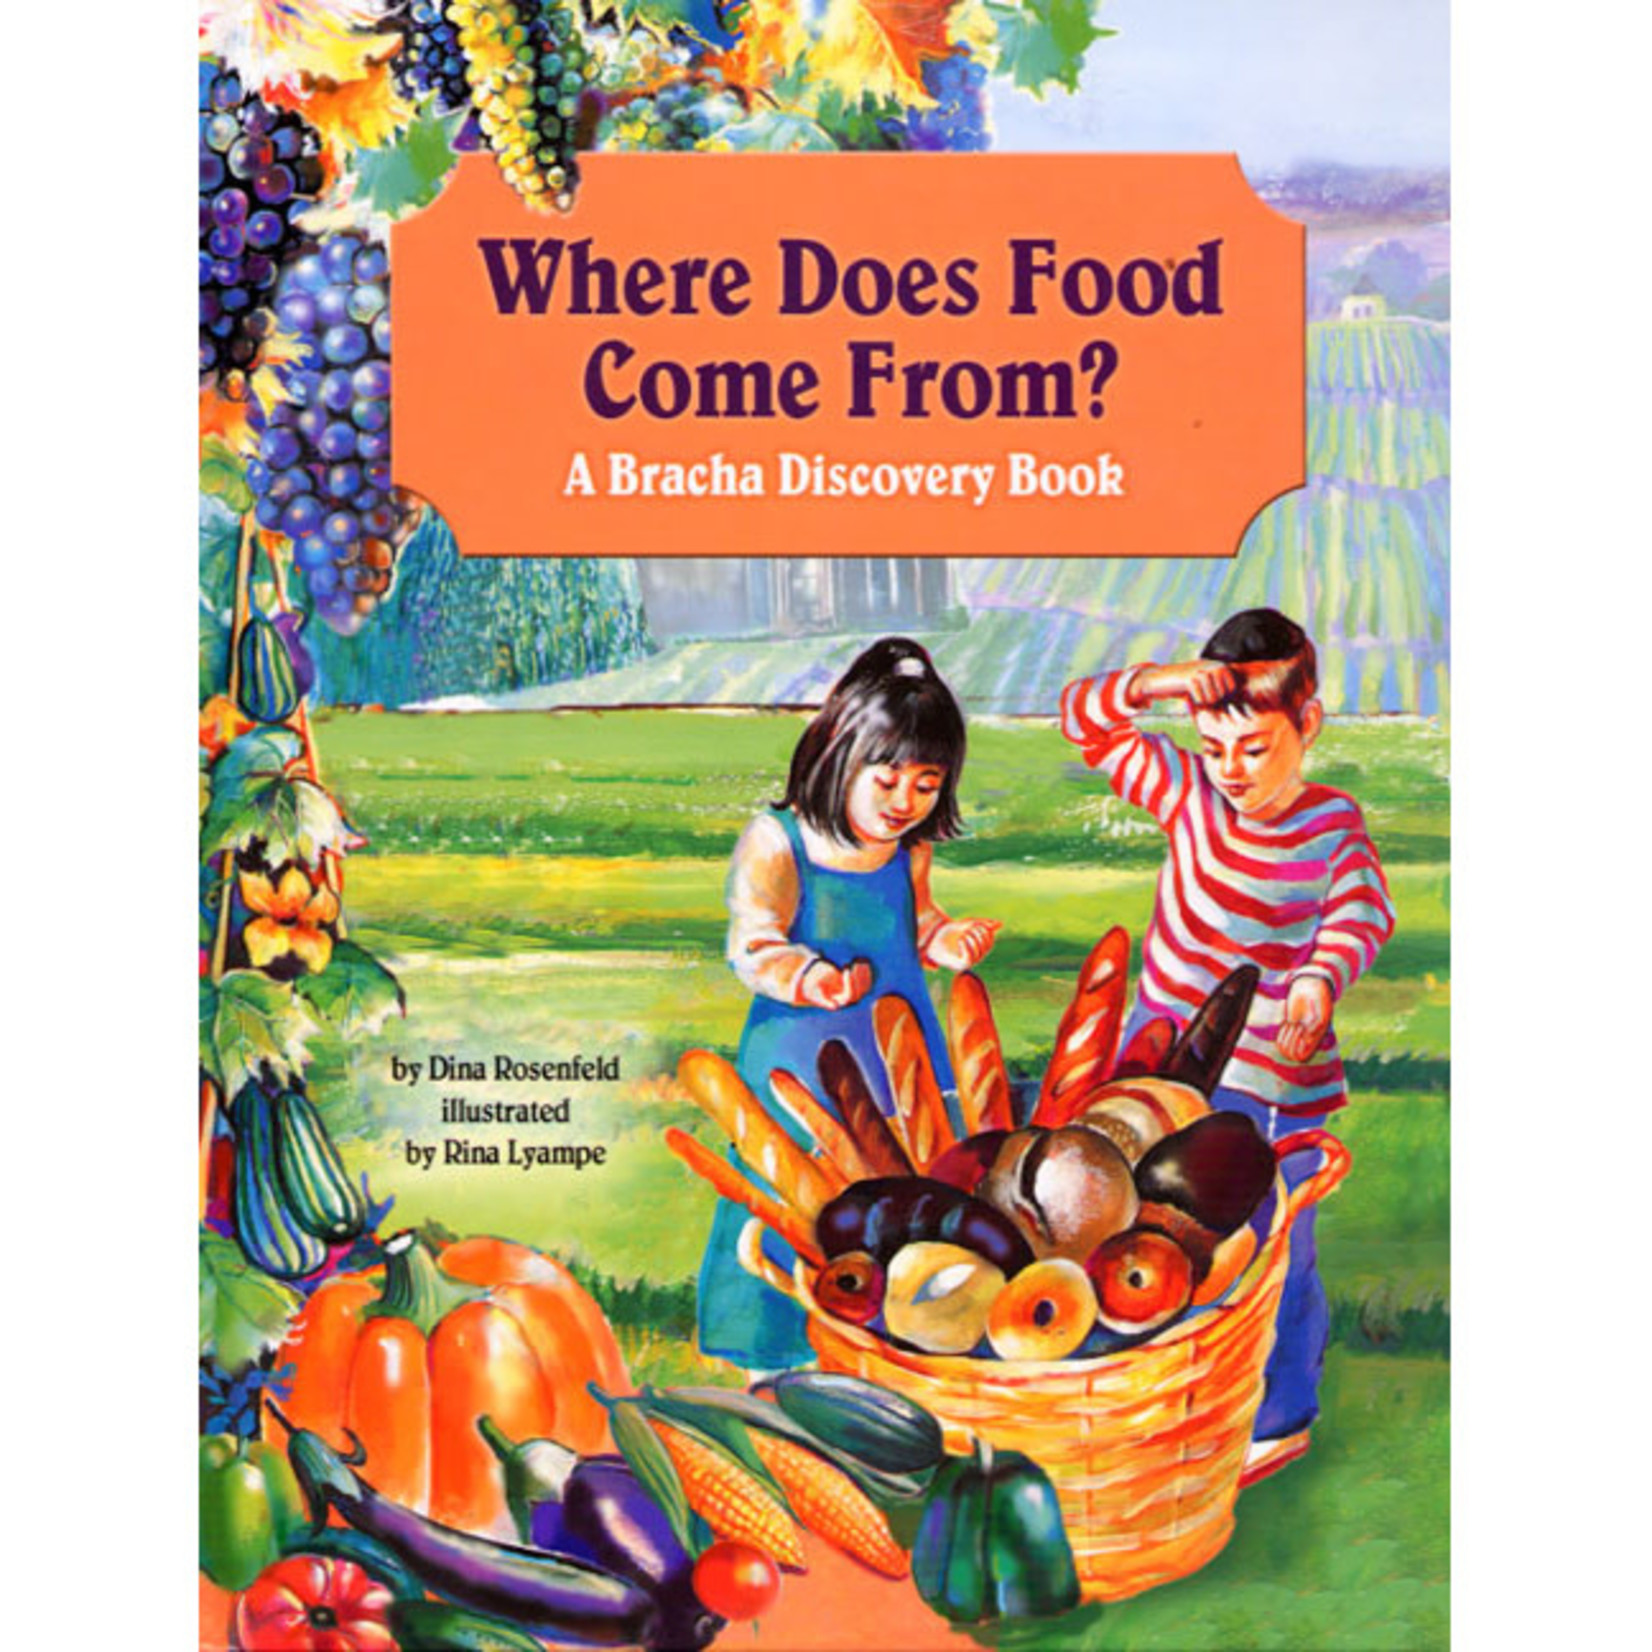 Where Does Food Come From? - A Beracha Discovery Book